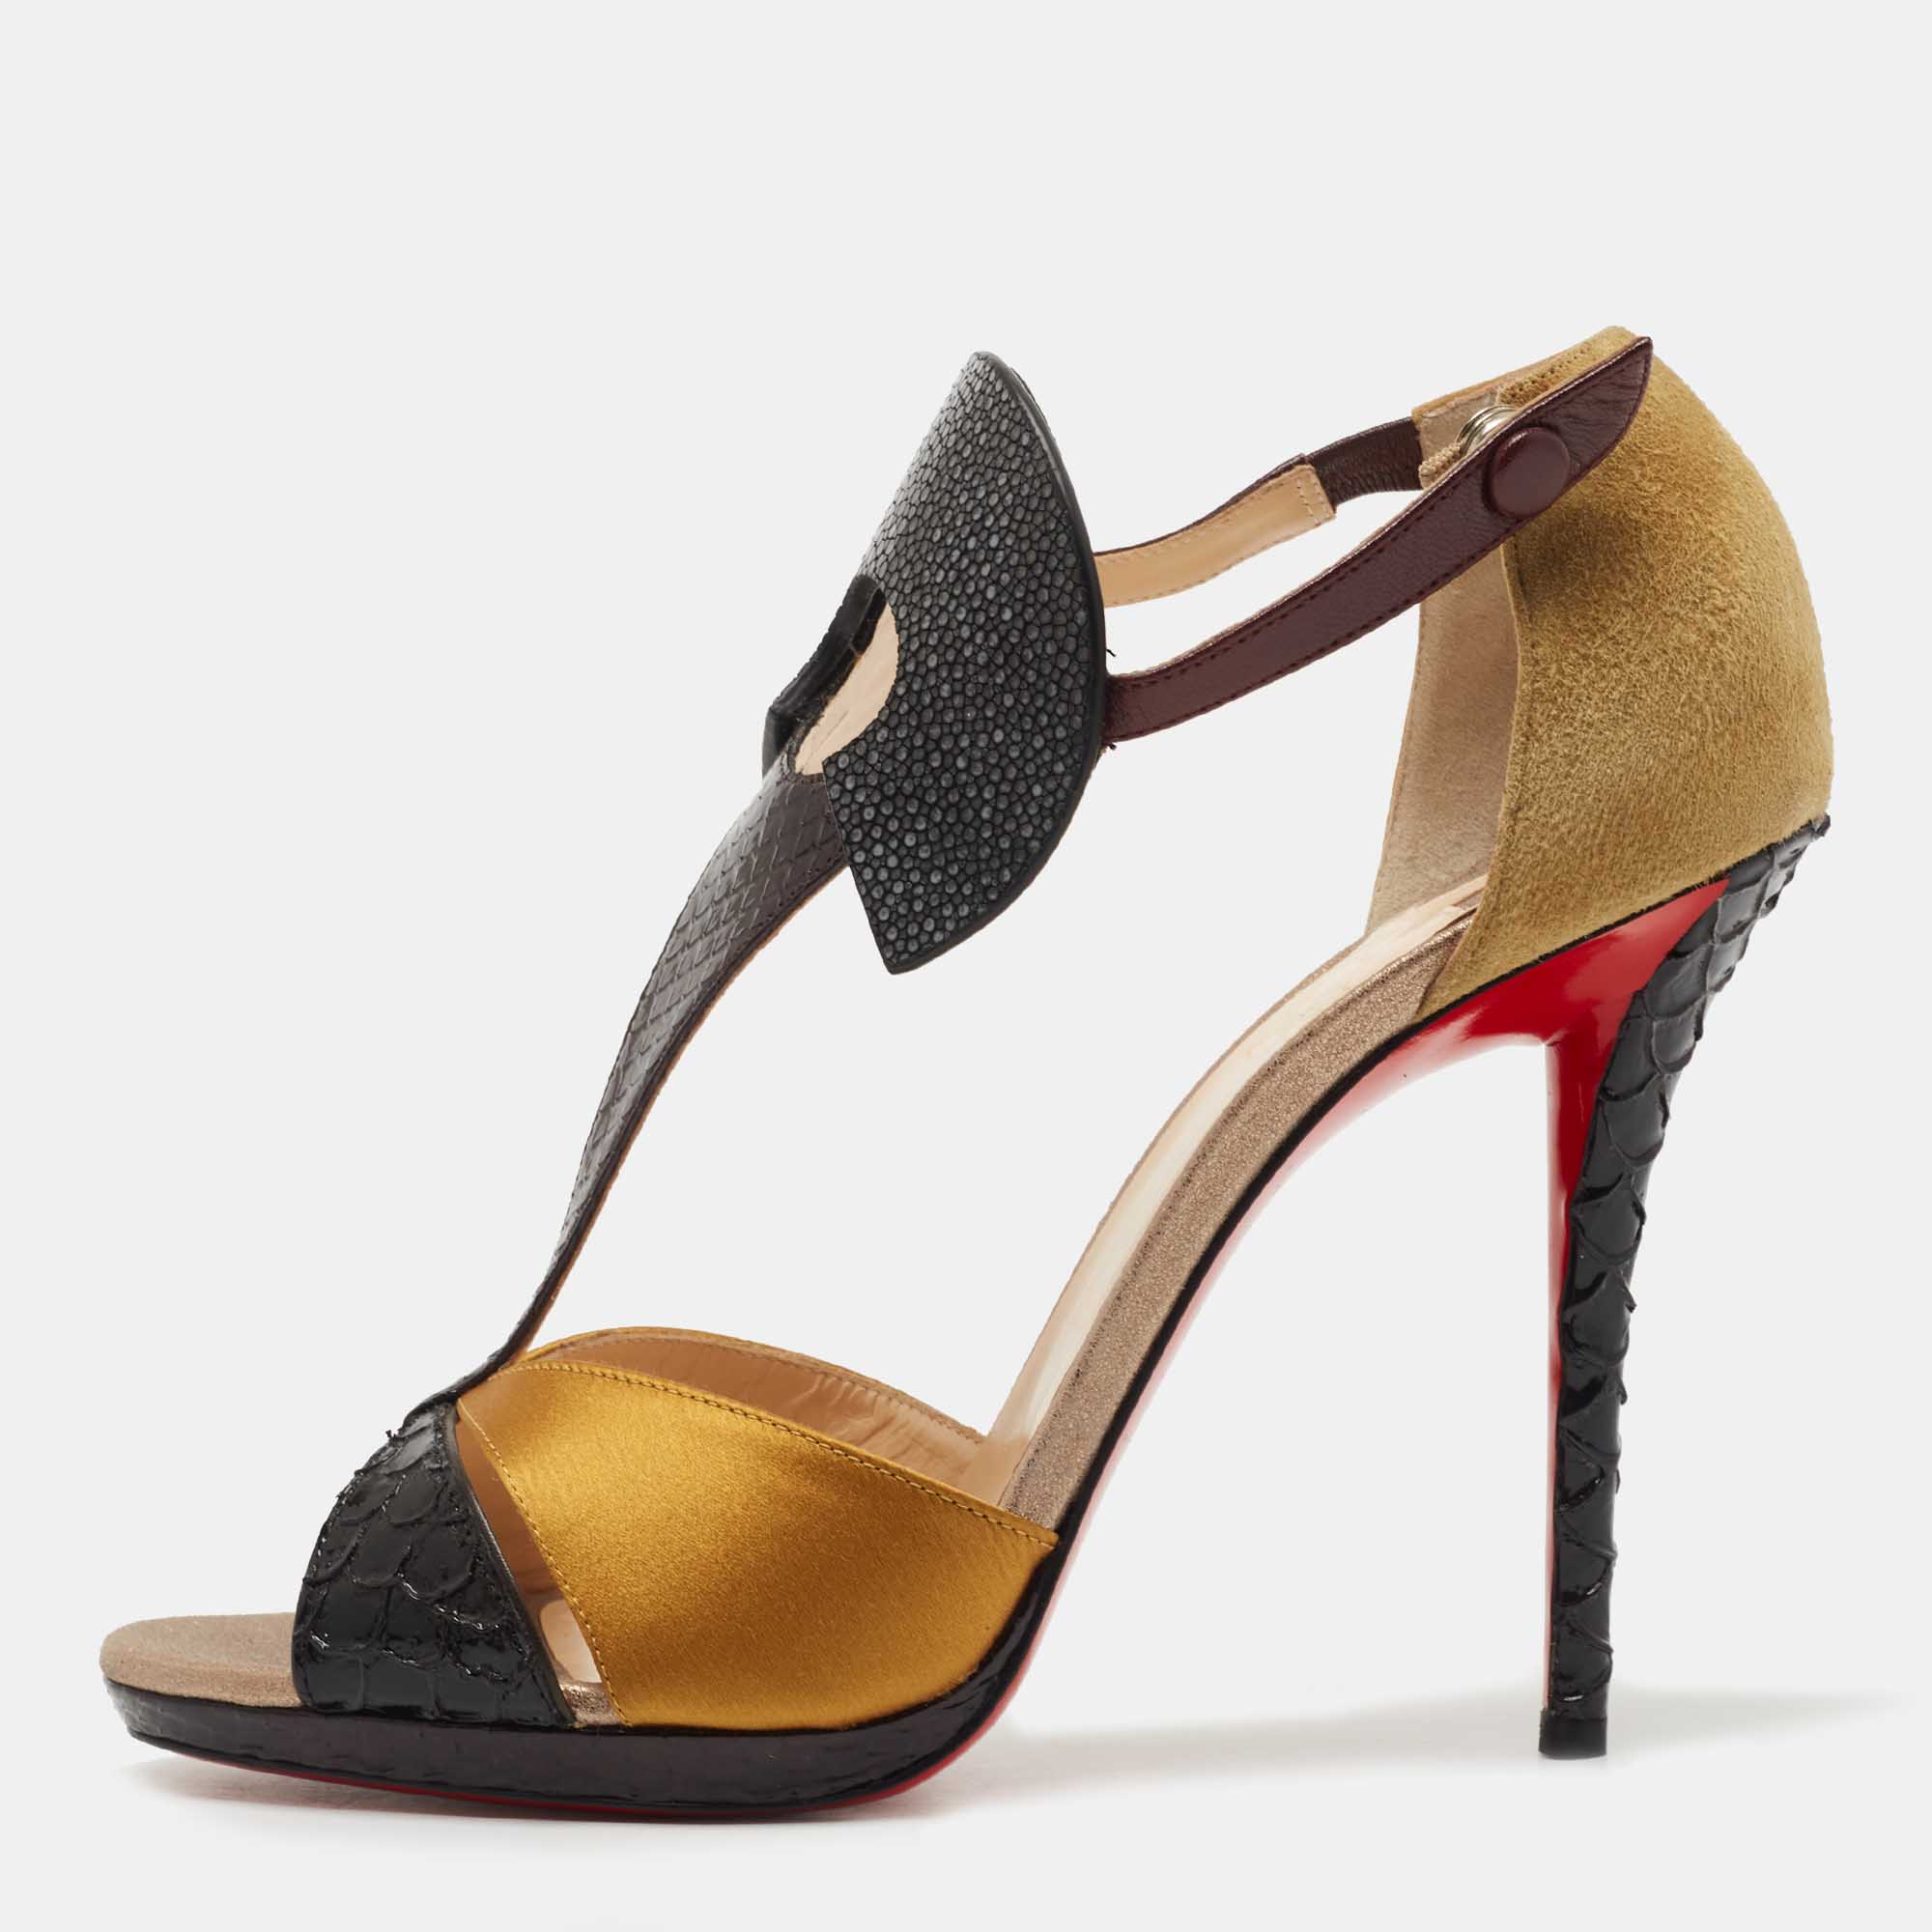 Christian louboutin black/yellow python embossed leather, suede and satin aztec sandals size 41